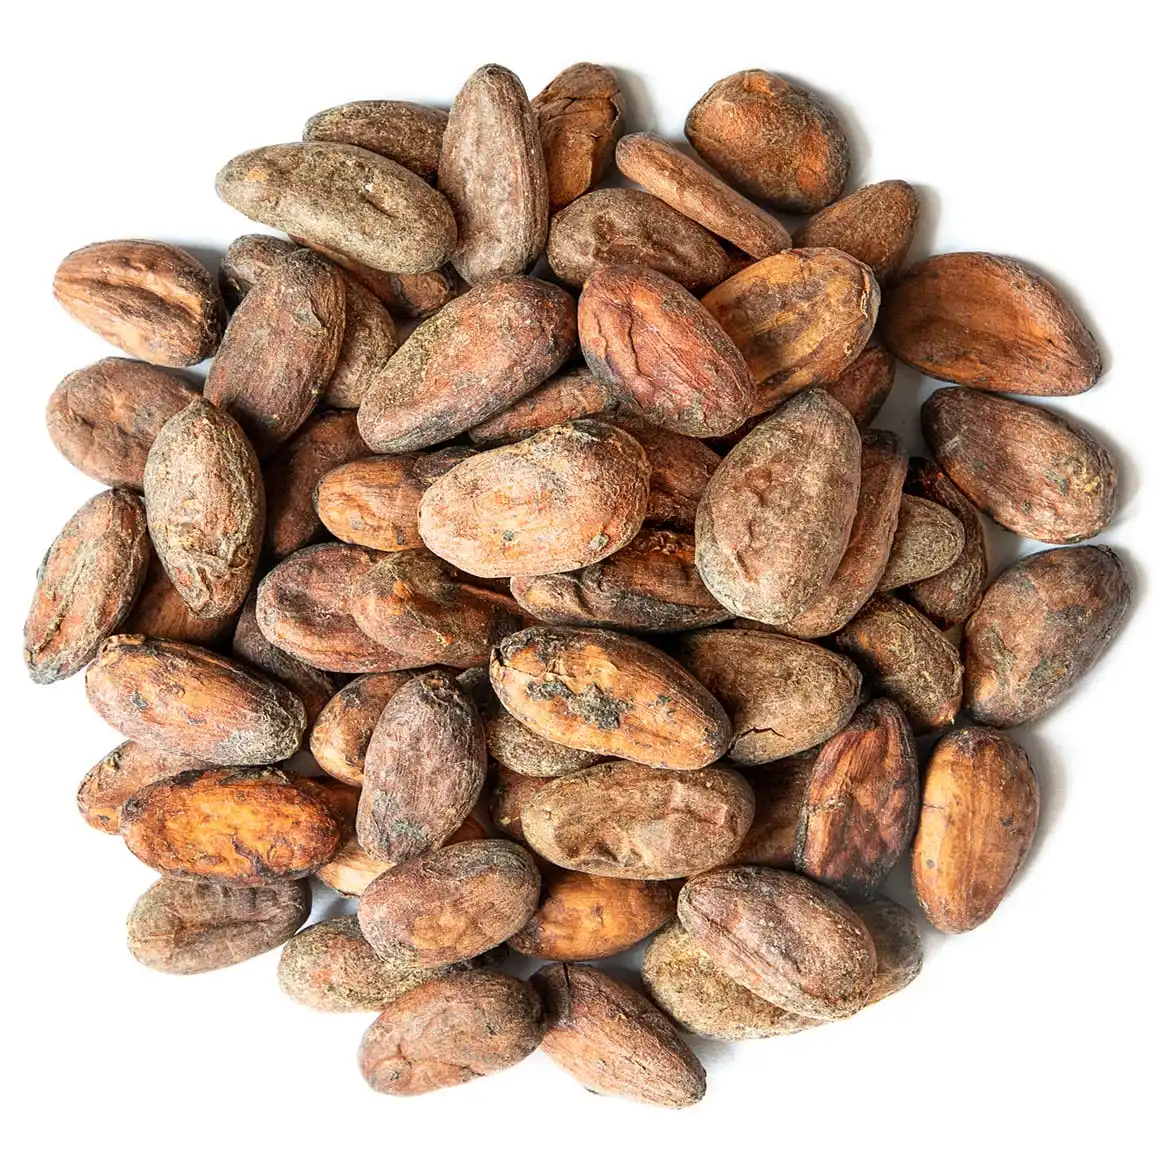 Wholesale Cocoa Beans Ariba Cacao beans Dried Raw Cacao Fermented Cocoa Beans Cheap Price